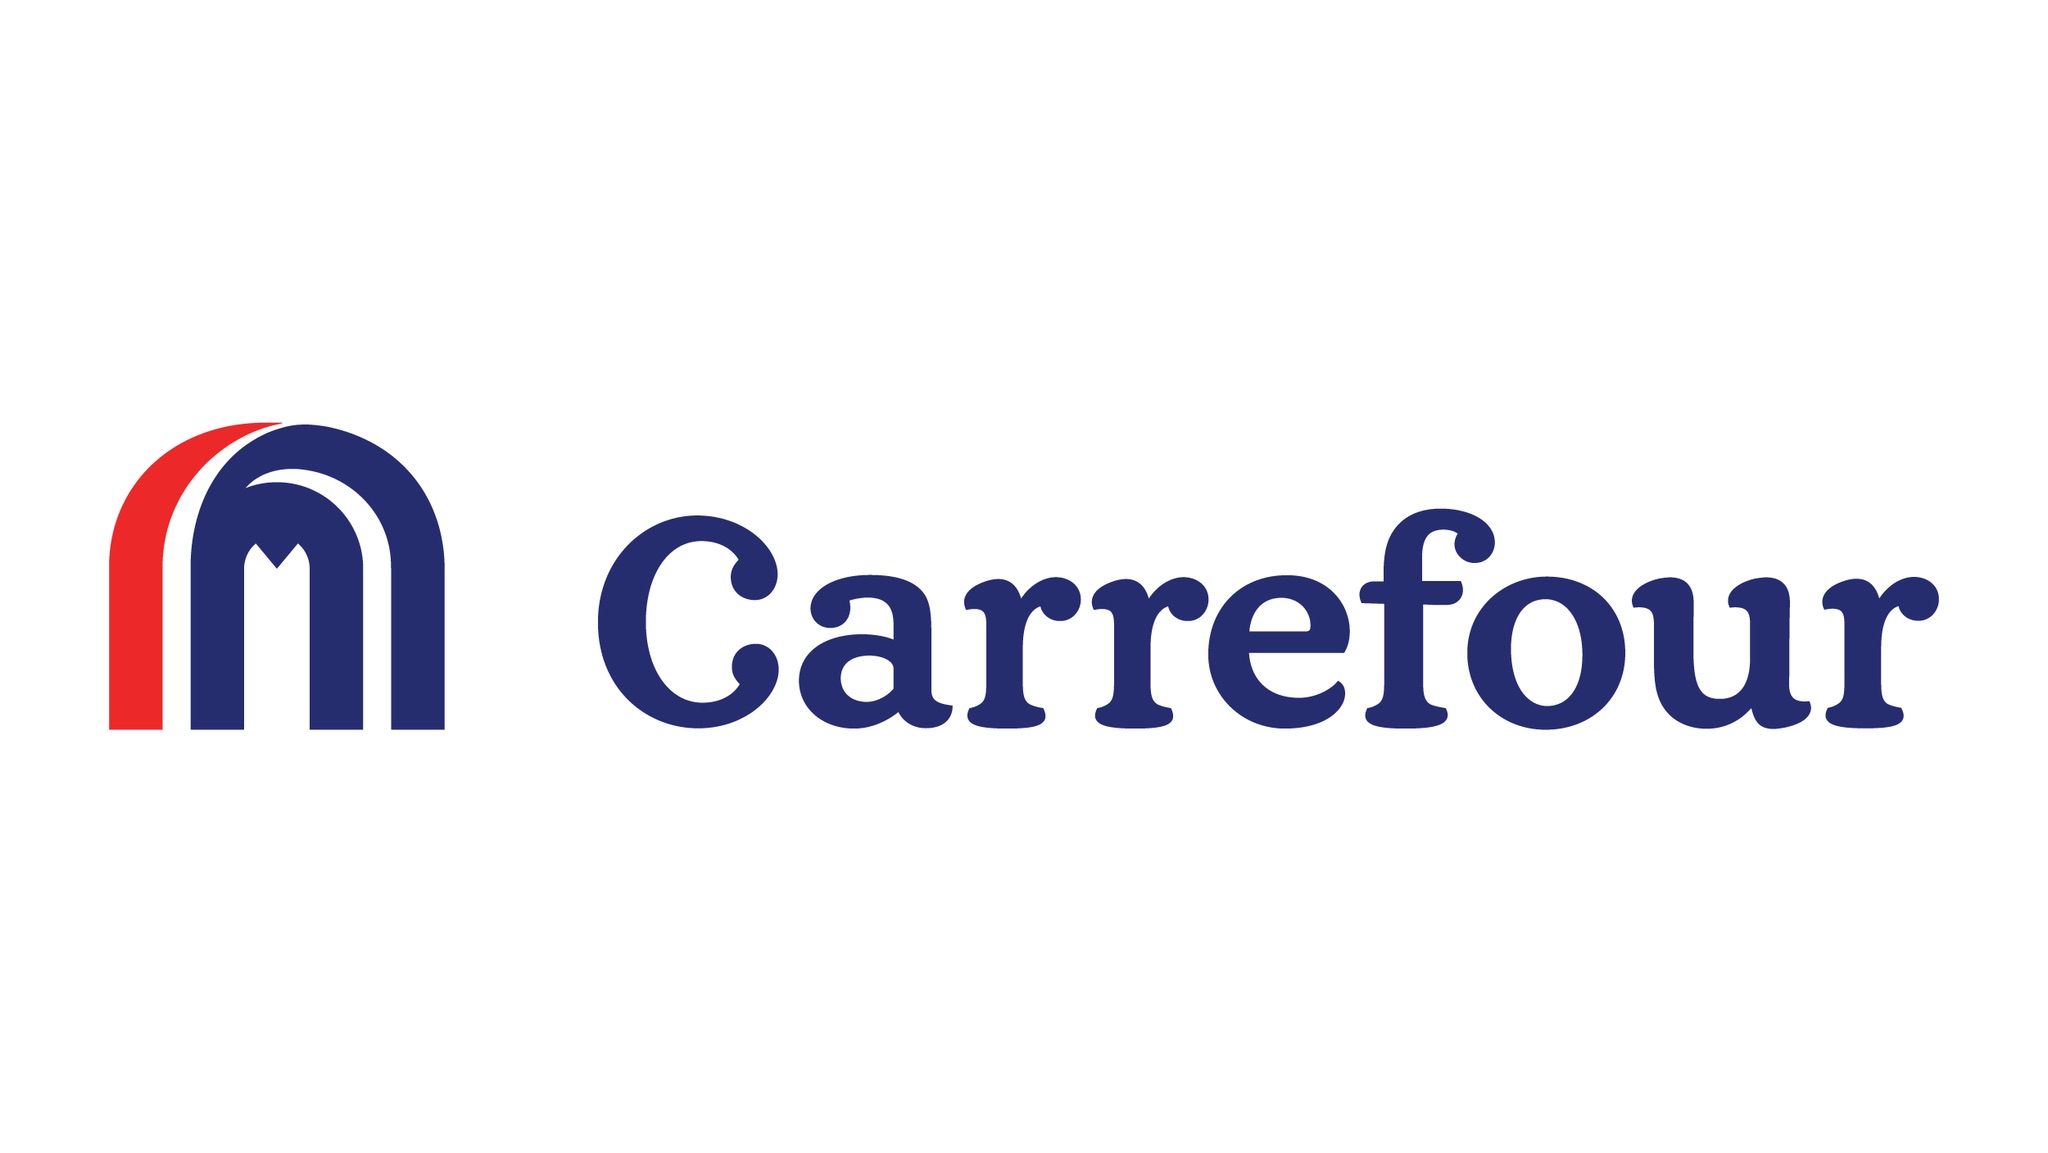 Carrefour launches EPIC Carrefour Friday, transforming November into a month-long celebration of deals across various product categories. Carrefour Launches Graduate Programme to Revolutionize Retail Talent